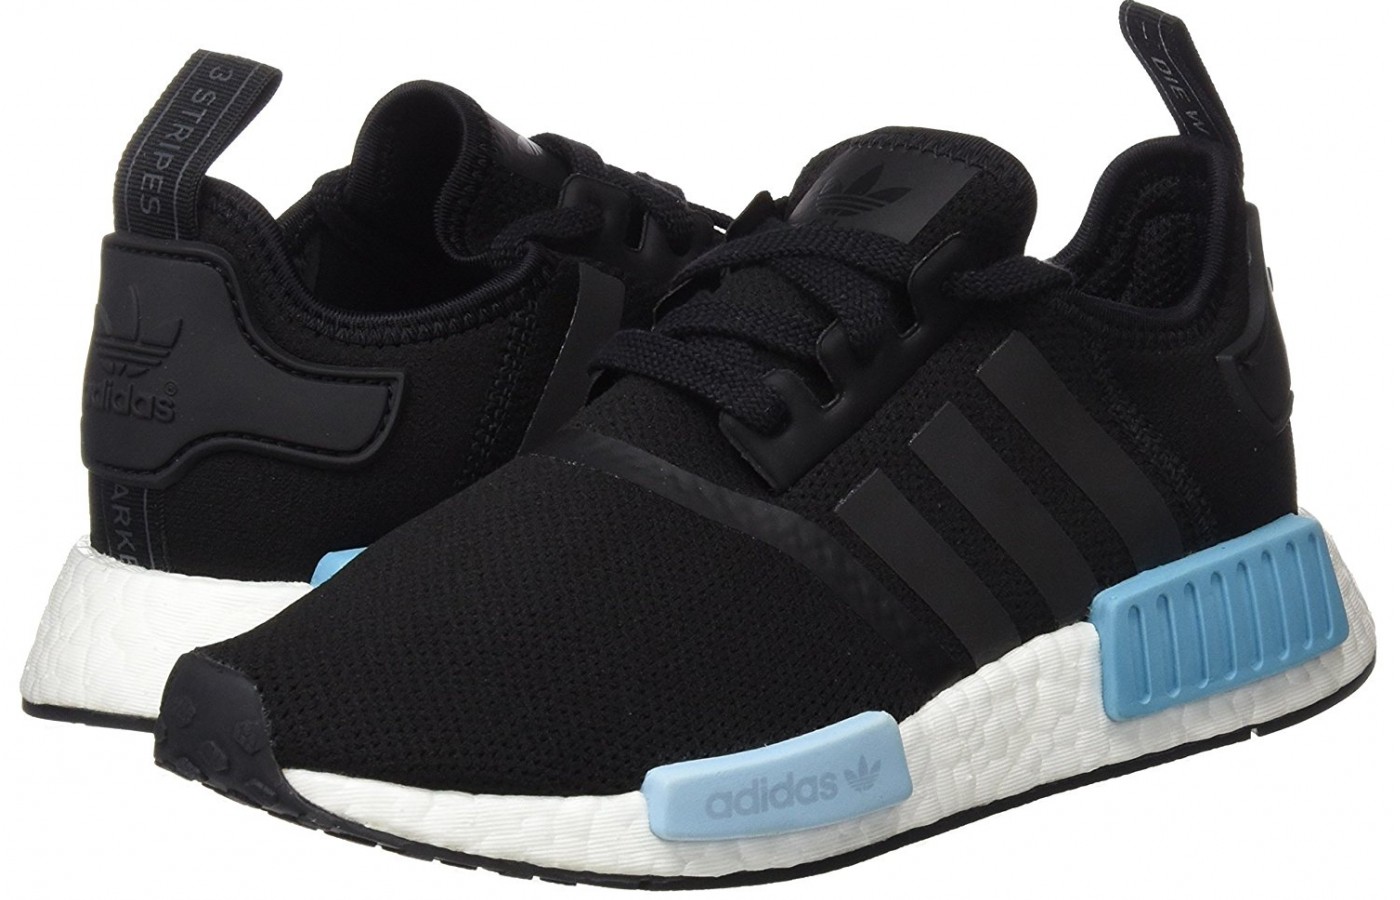 ADIDAS NMD R1 SNEAKER RELEASE